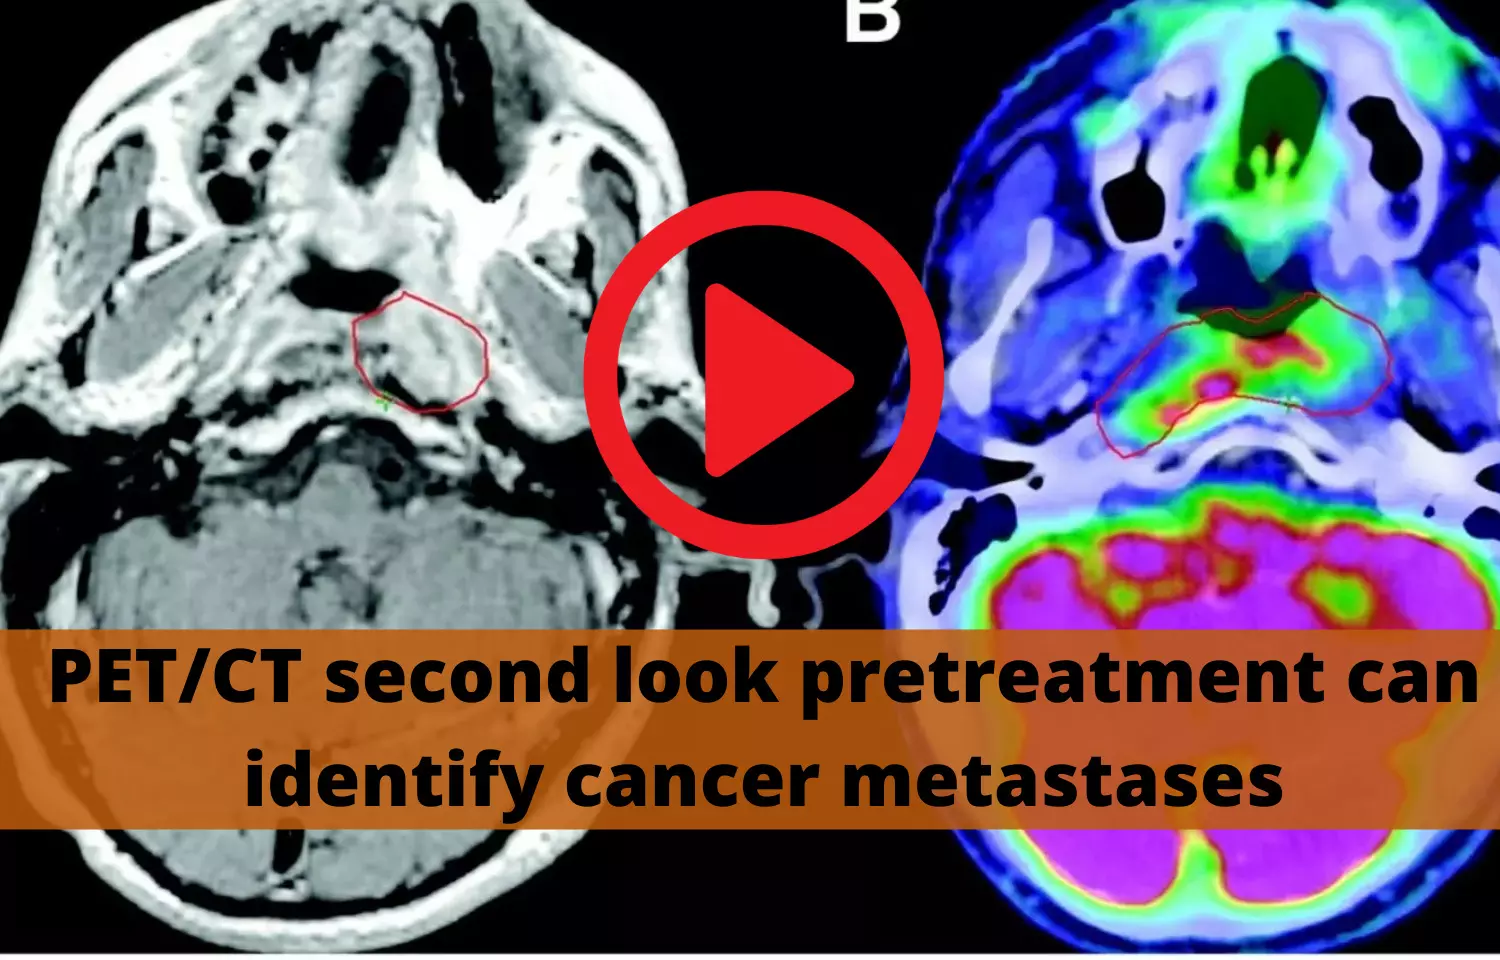 PET/CT second look pretreatment can identify cancer metastases